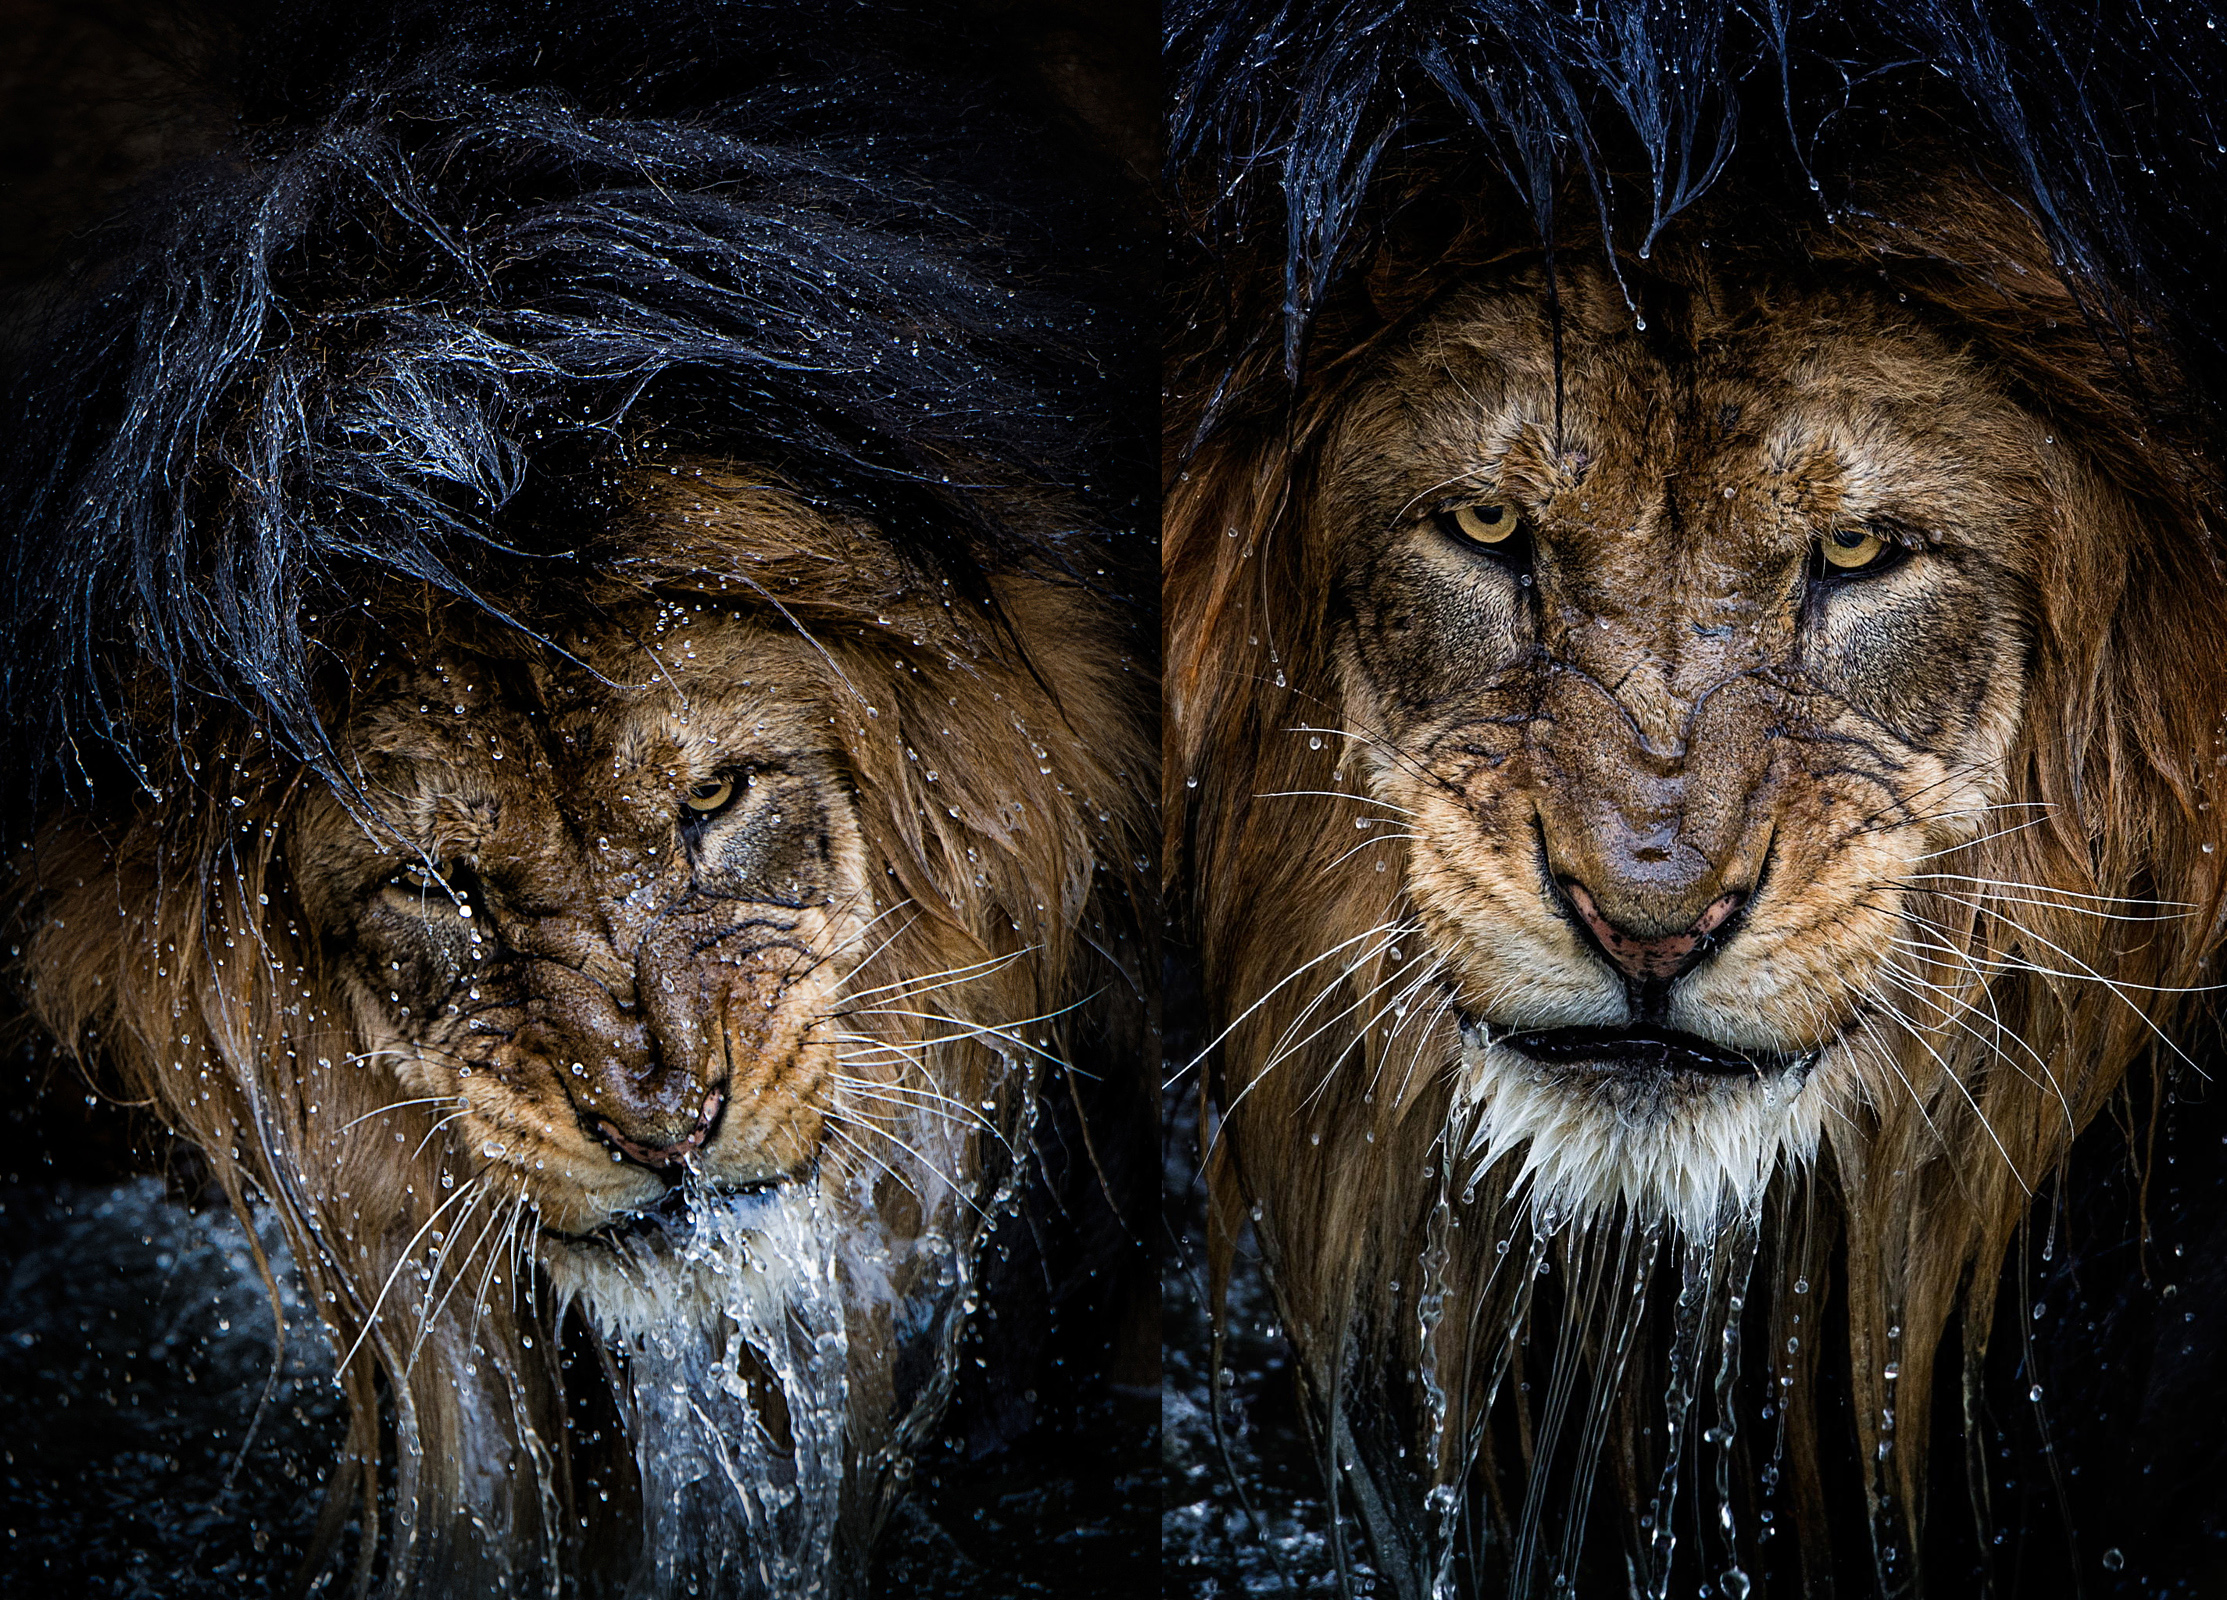 Exclusive: The Story Behind the Most Intense Lion Portrait